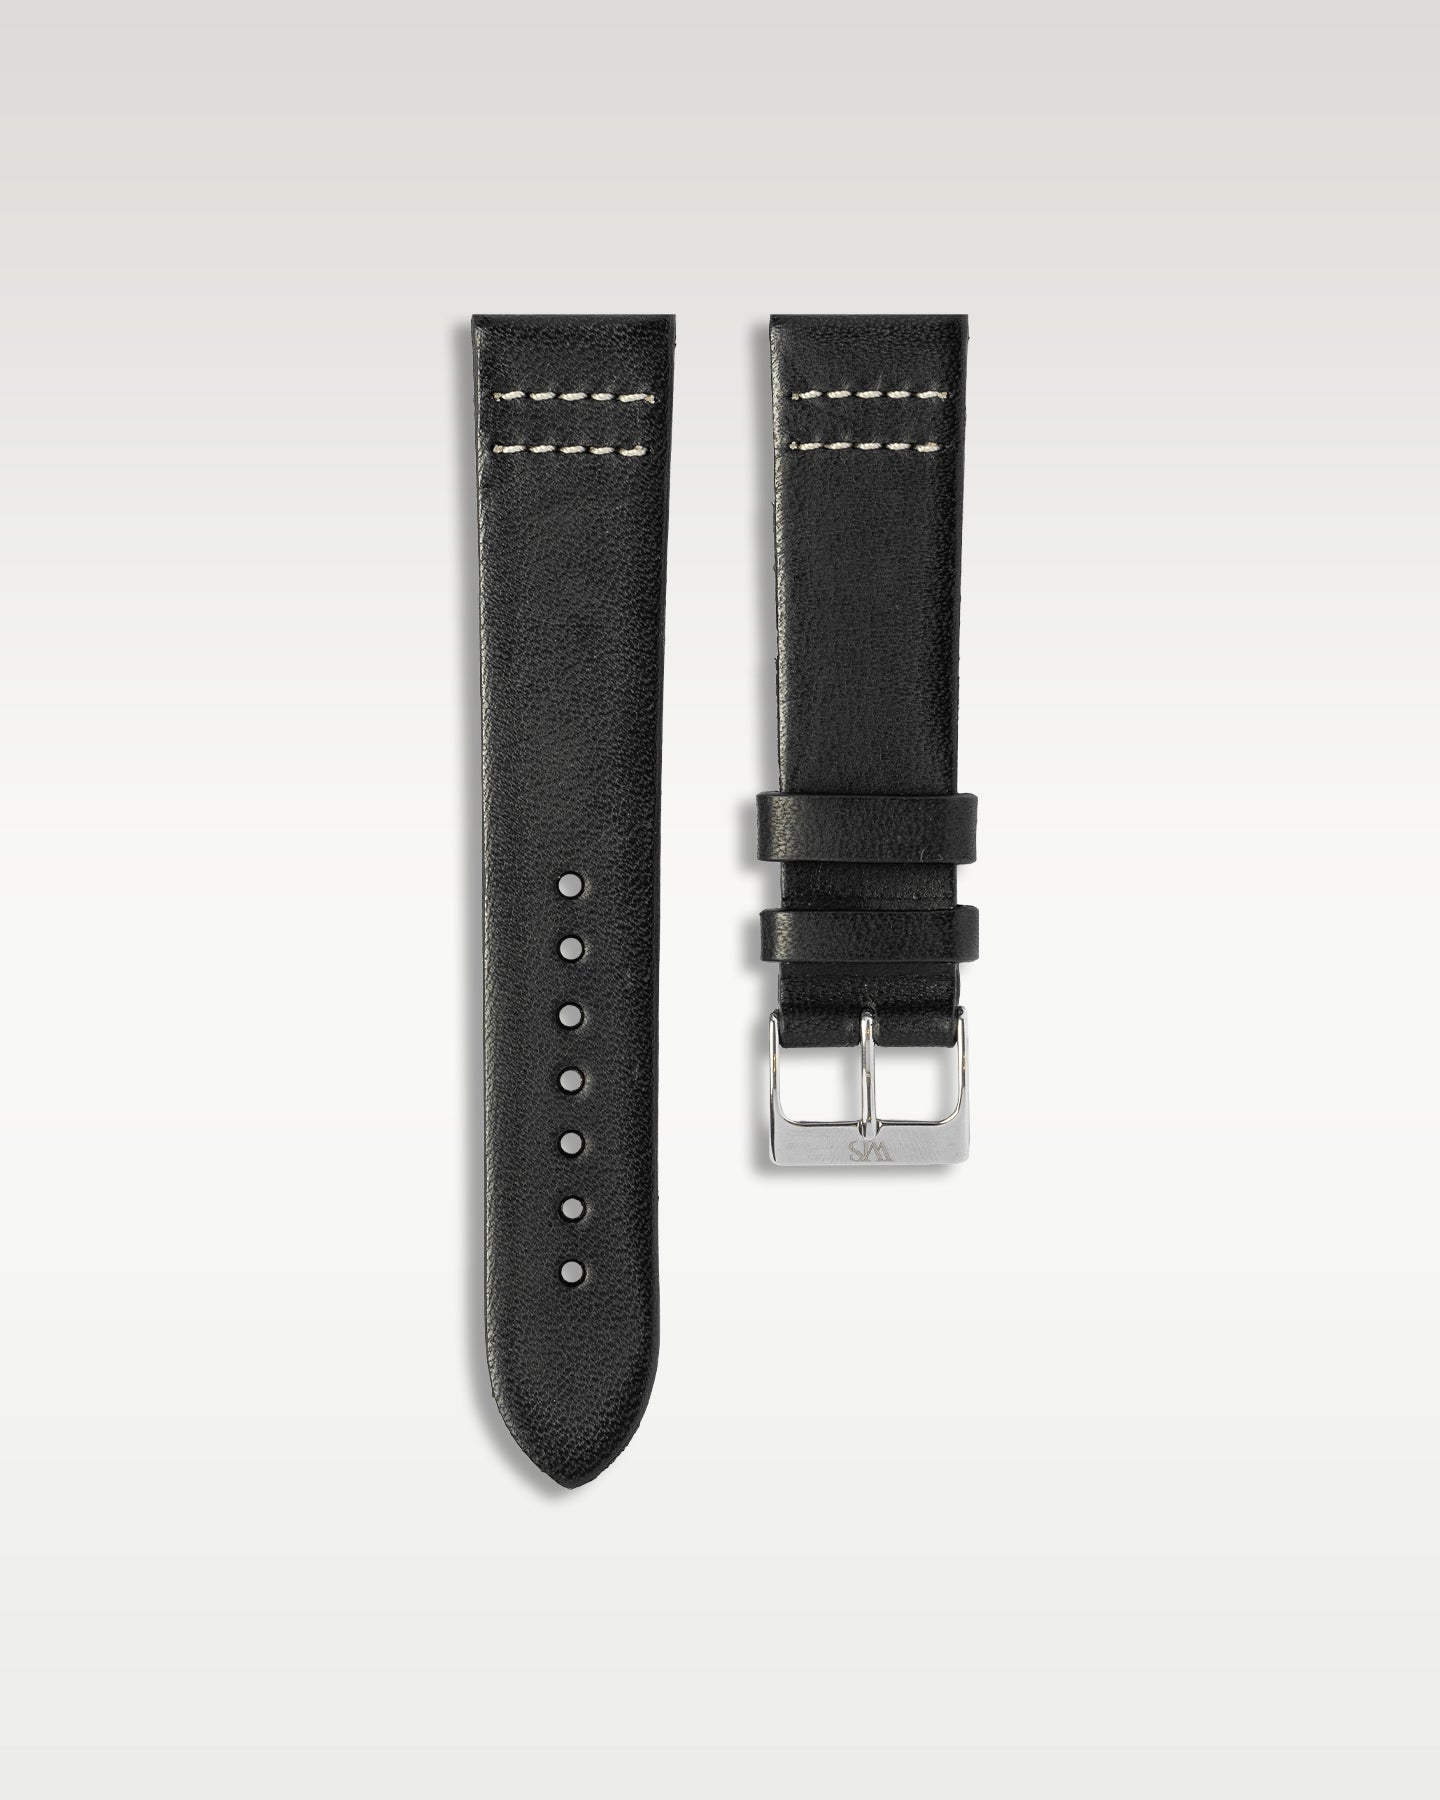 Handmade Italian Leather Strap in Black with White Stitching